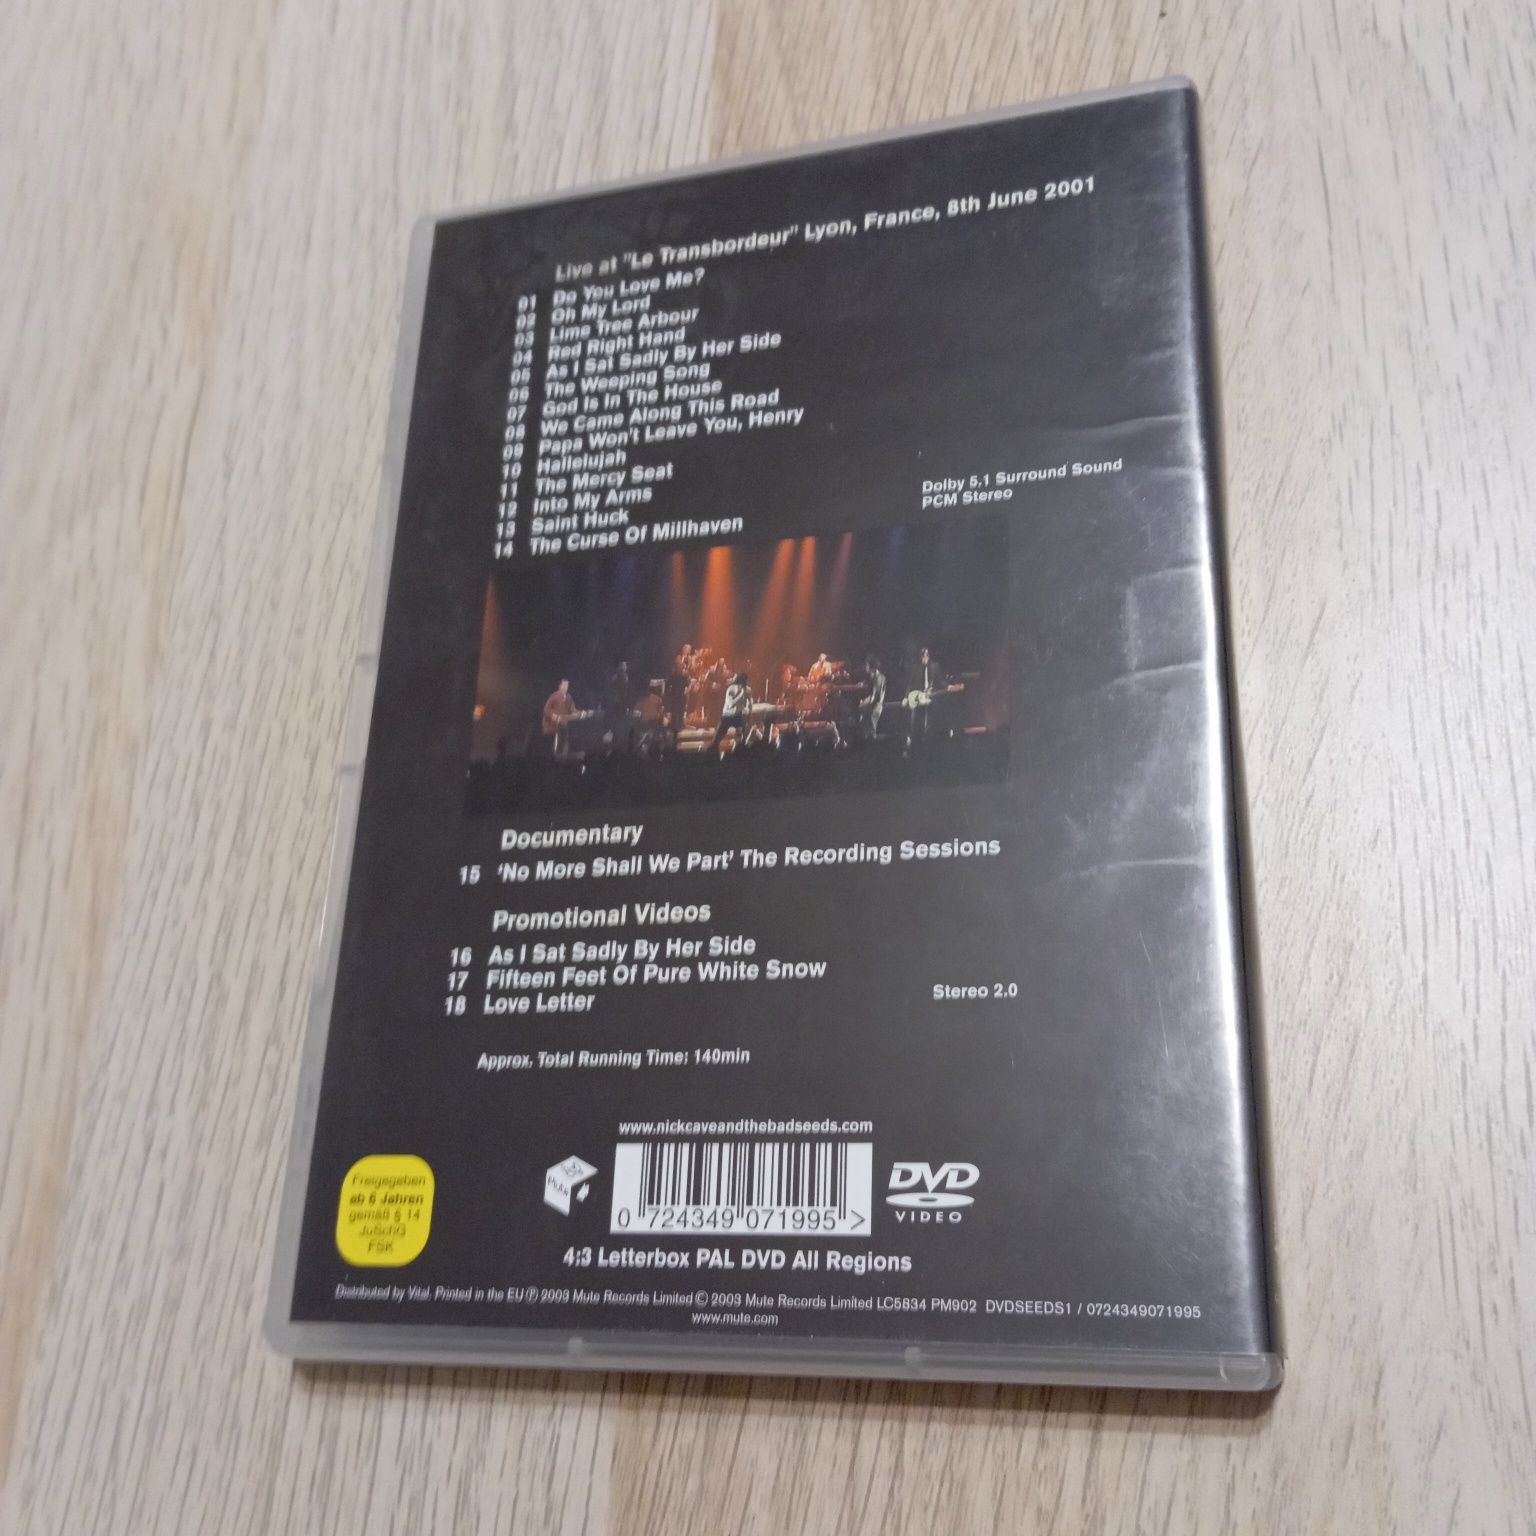 Nick Cave and The Bed Seeds "God is on the house" DVD